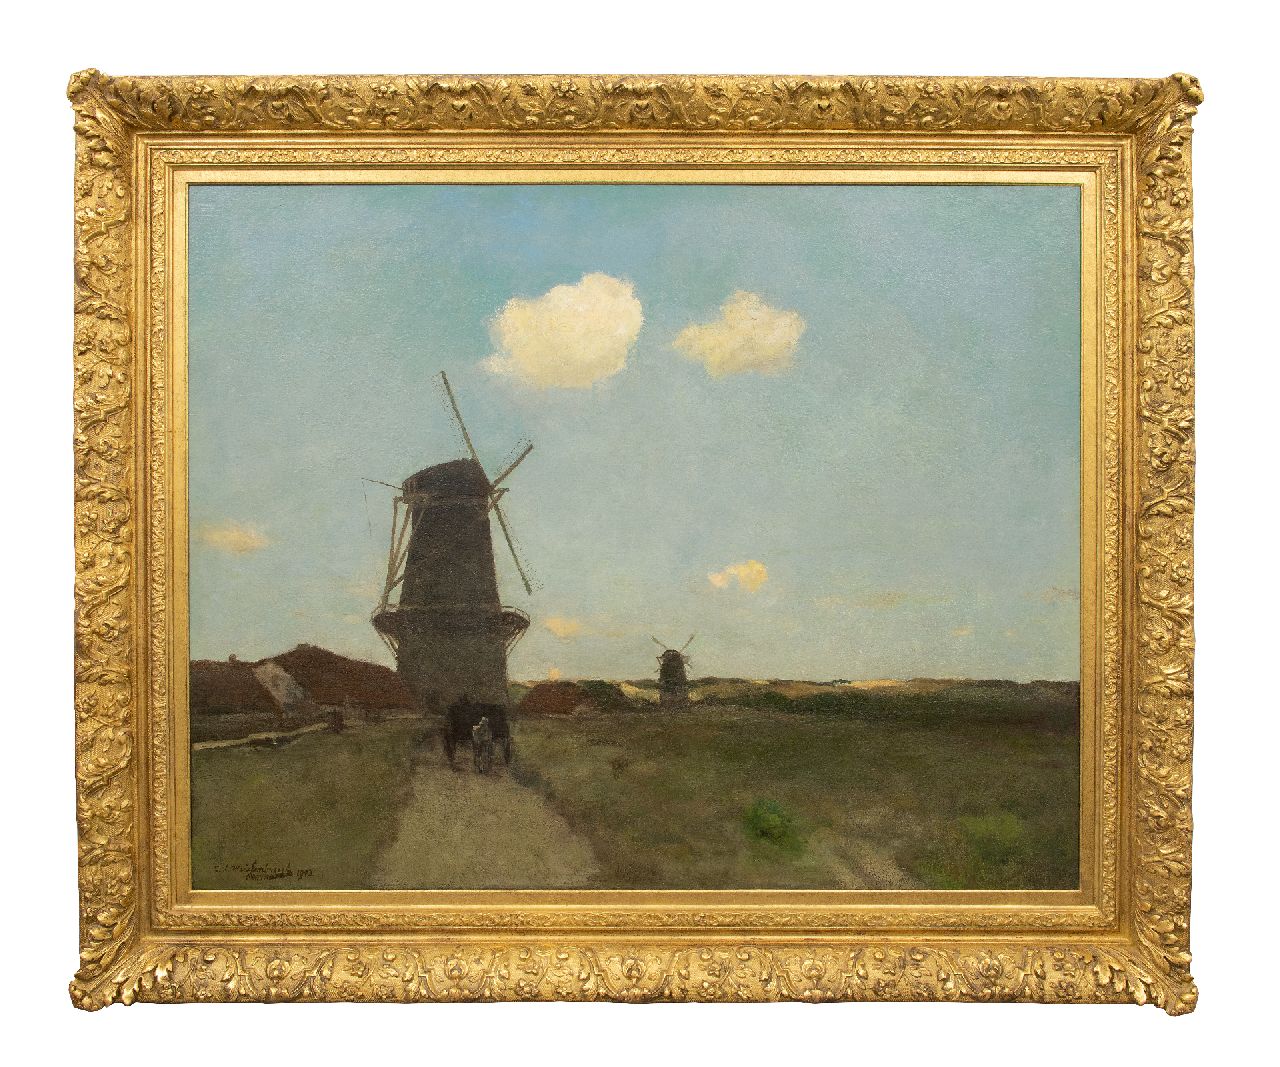 Weissenbruch H.J.  | Hendrik Johannes 'J.H.' Weissenbruch | Paintings offered for sale | Landscape with windmills, oil on canvas 103.0 x 128.8 cm, signed l.l. and dated 1902